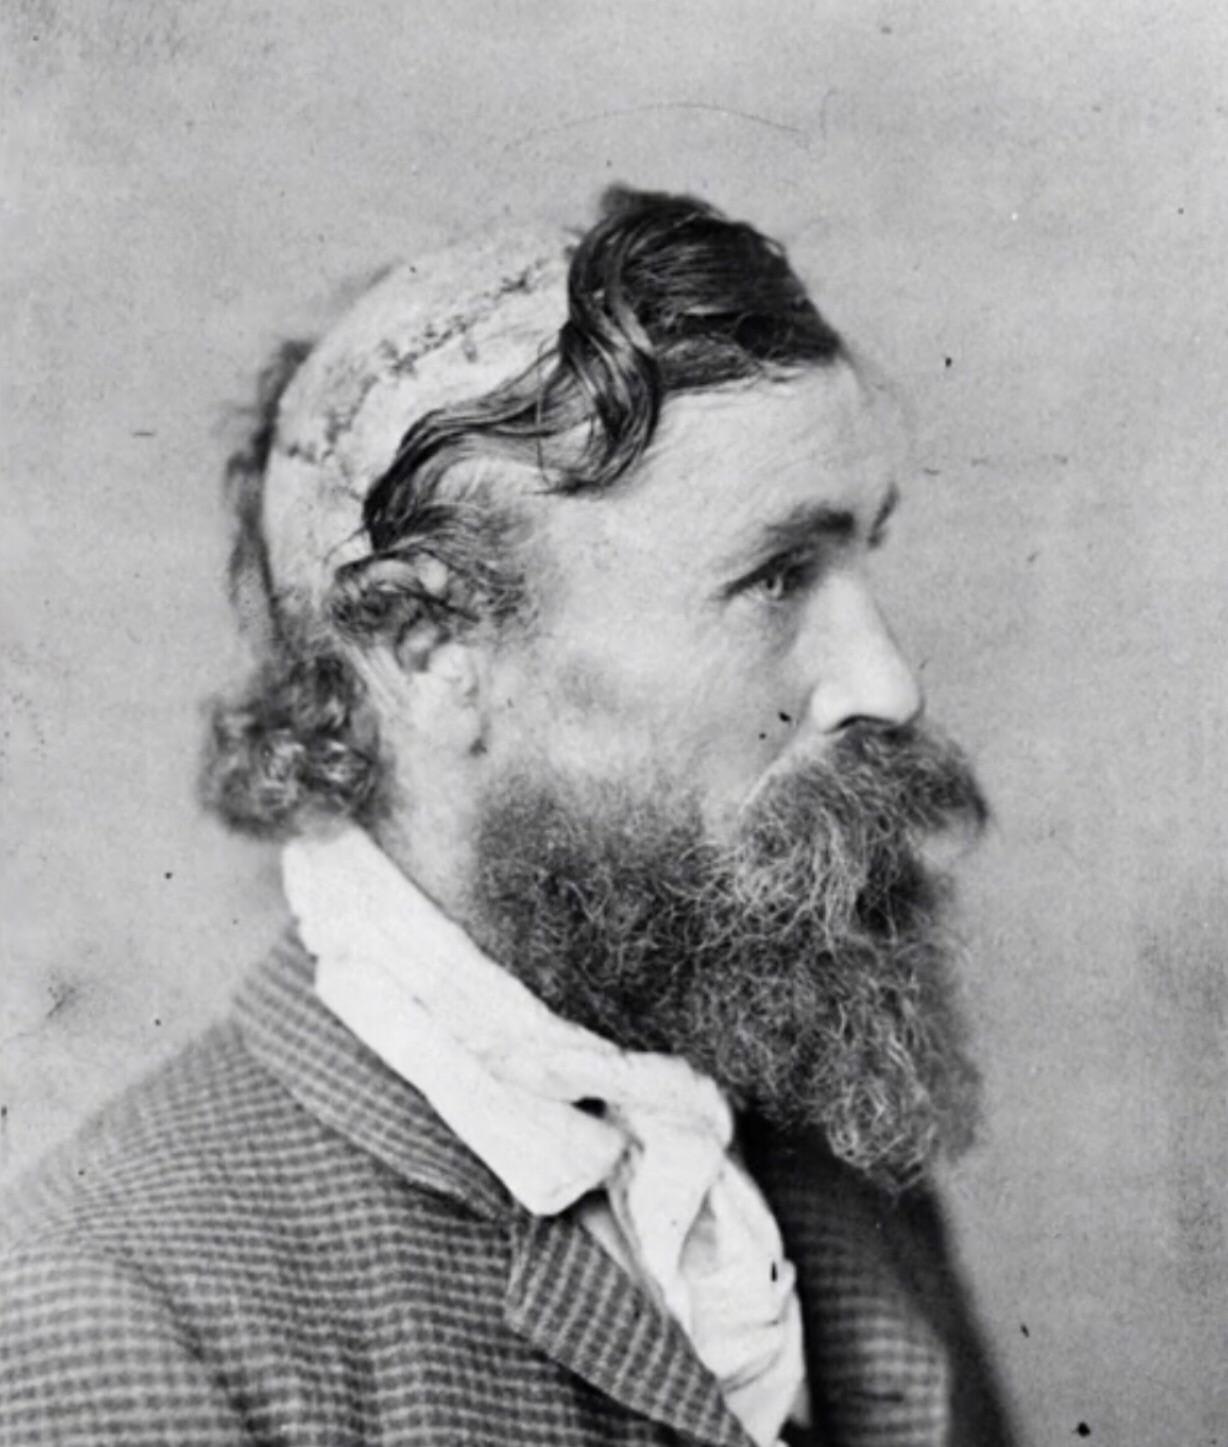 Robert McGee, the man who was scalped as a child by native Americans 1864